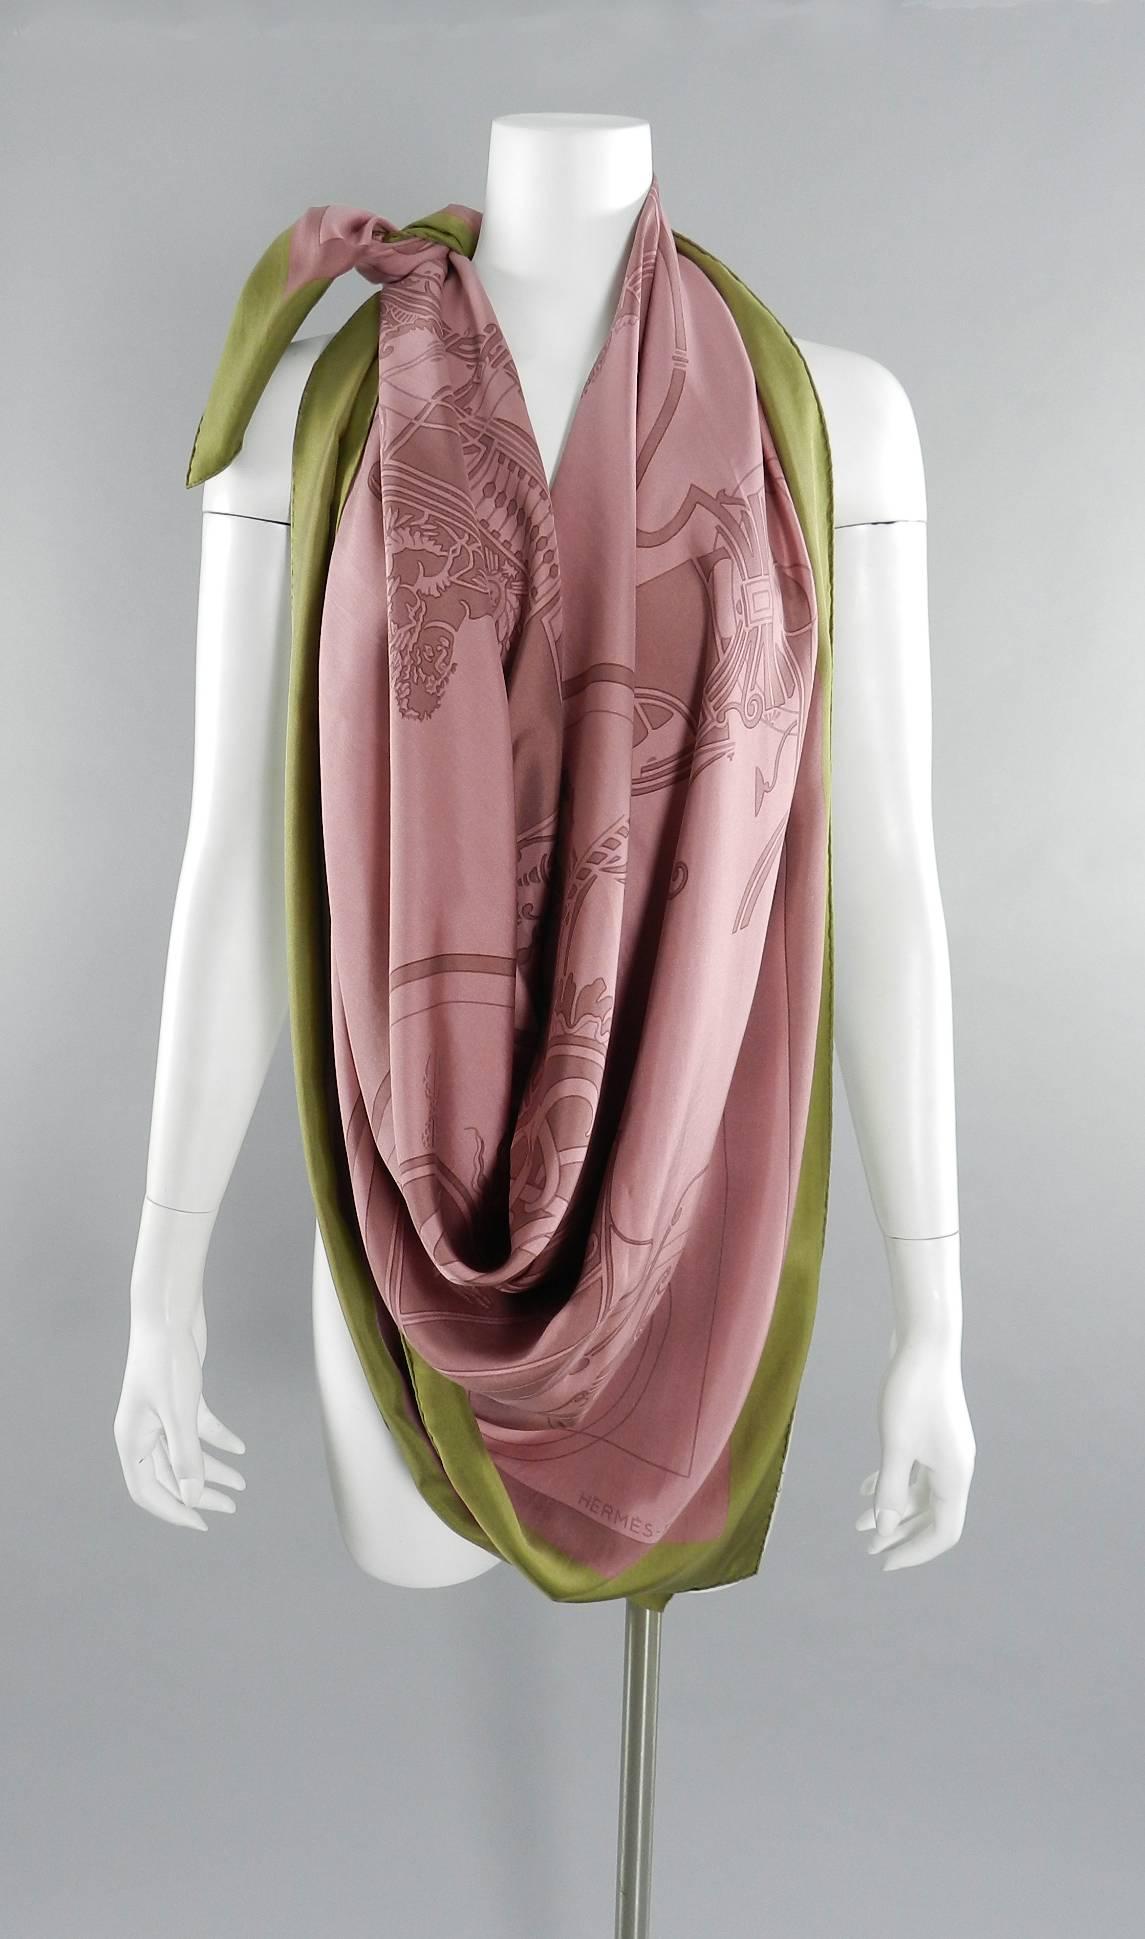 HERMES silk twill Ex Libris Carriage 140 cm shawl / wrap - pink and olive.  Excellent pre-owned - with box.

We ship worldwide.